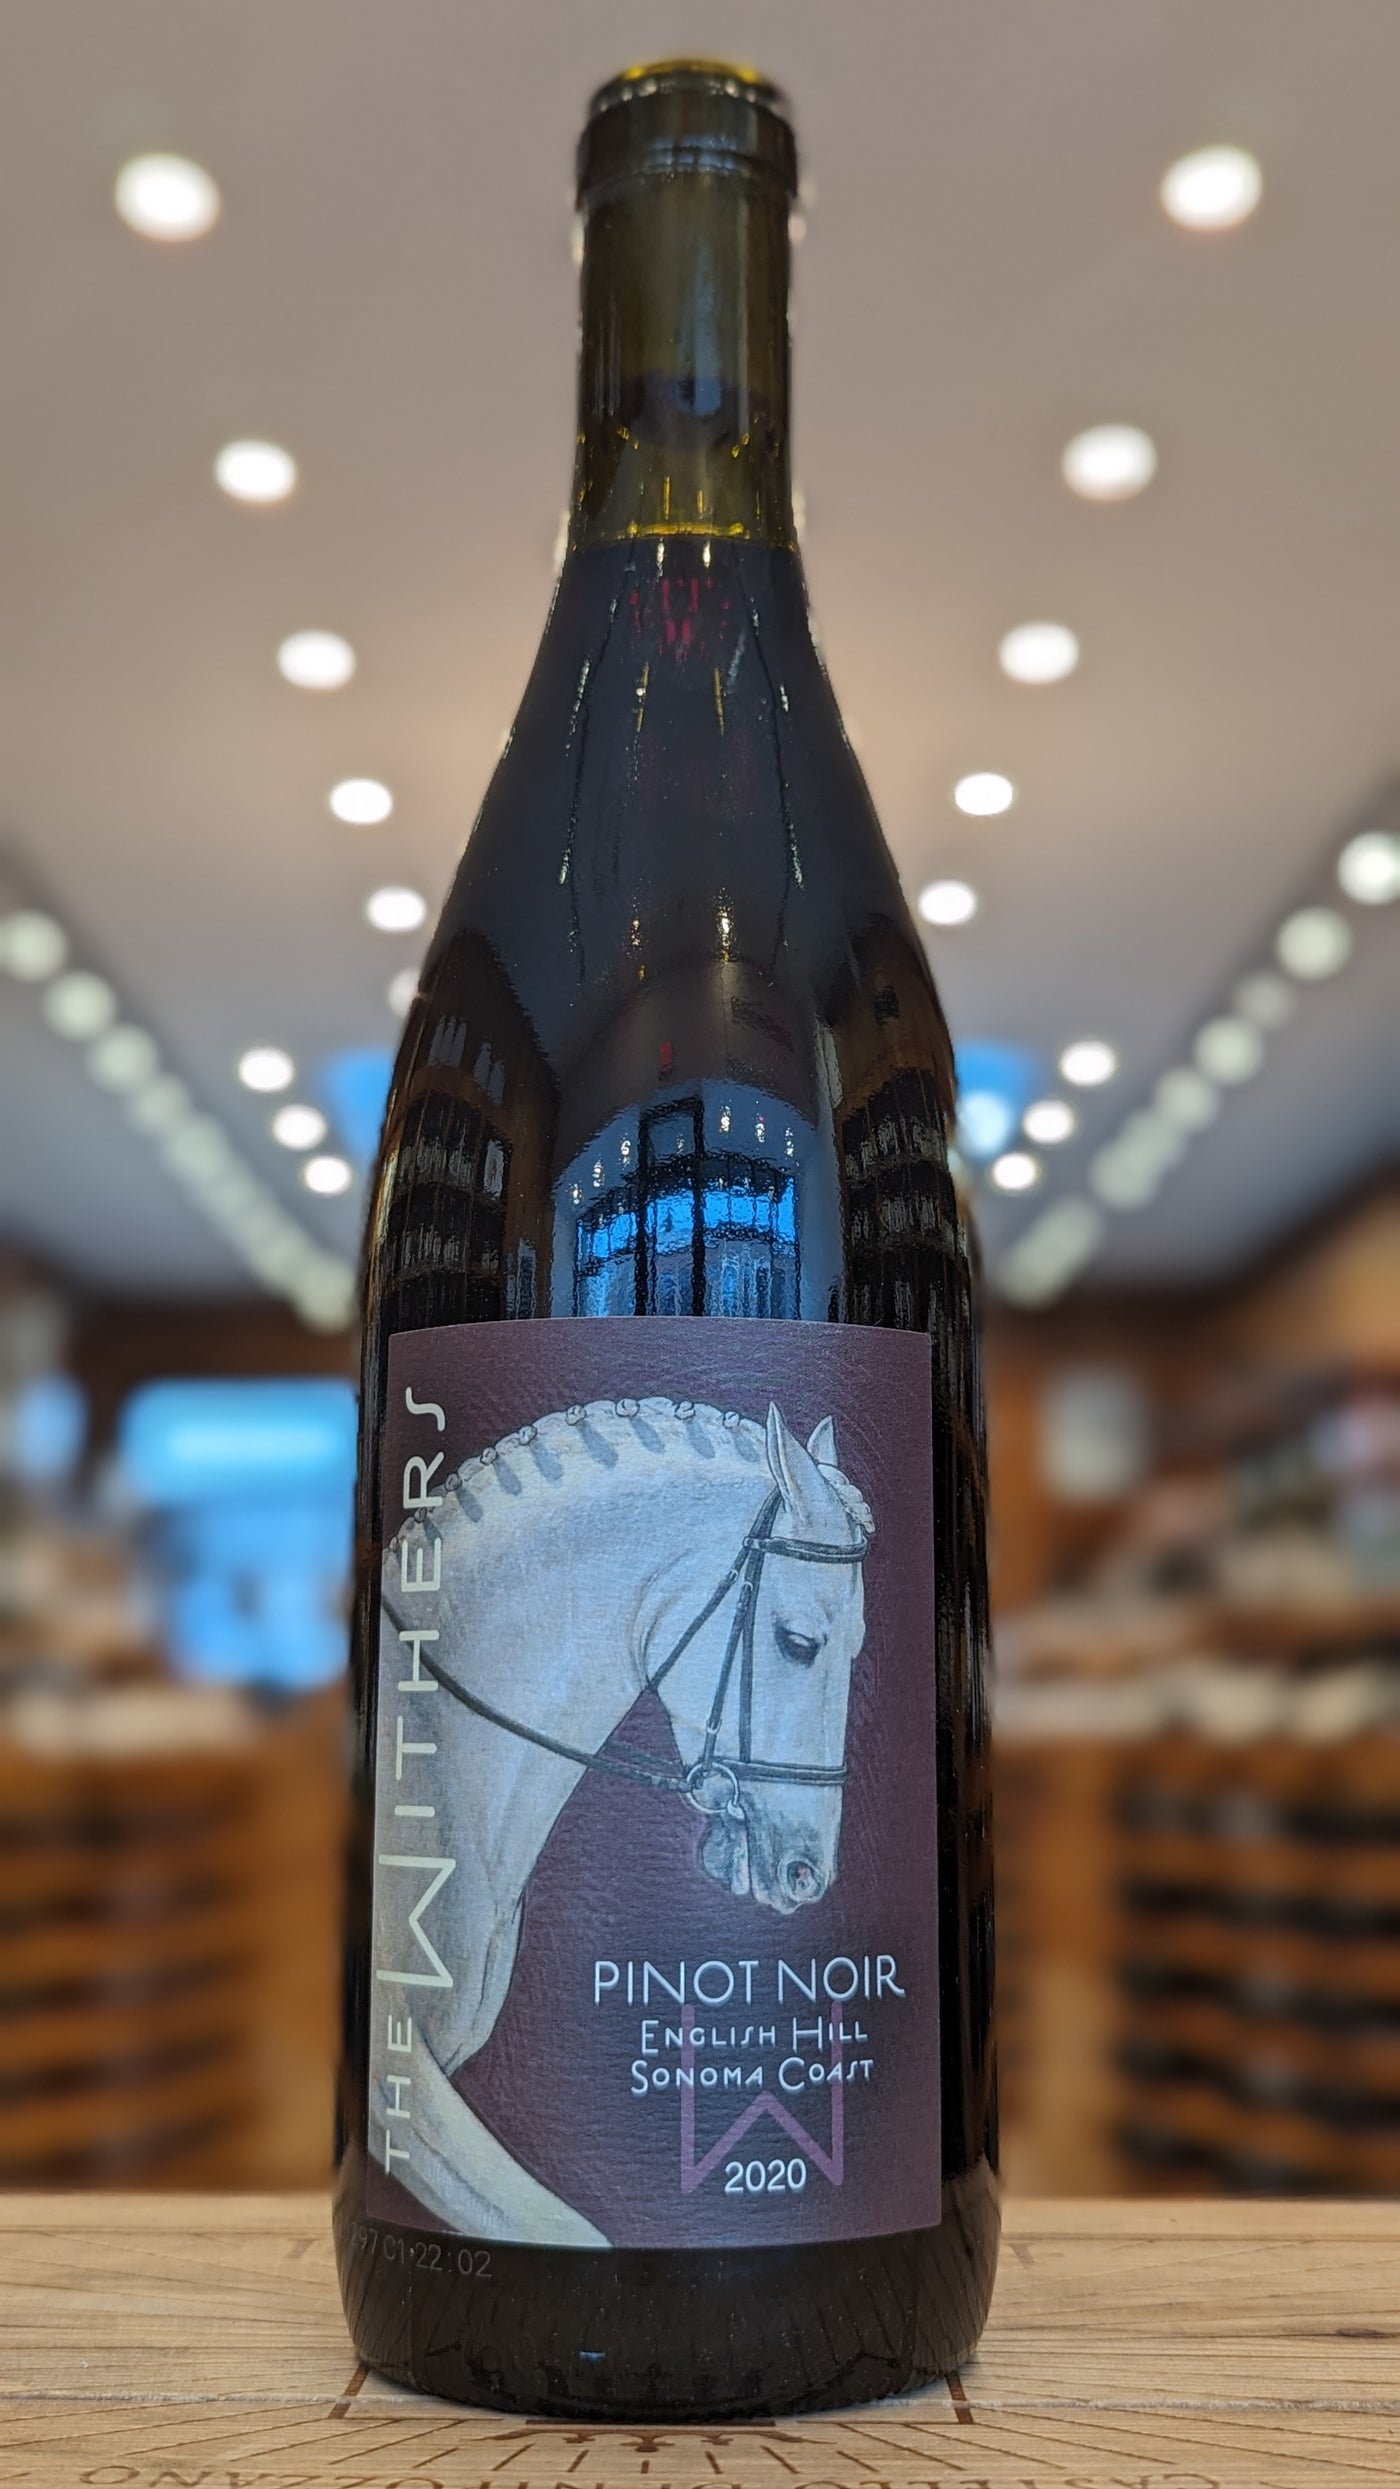 The Withers English Hill Vyd Pinot Noir 2018